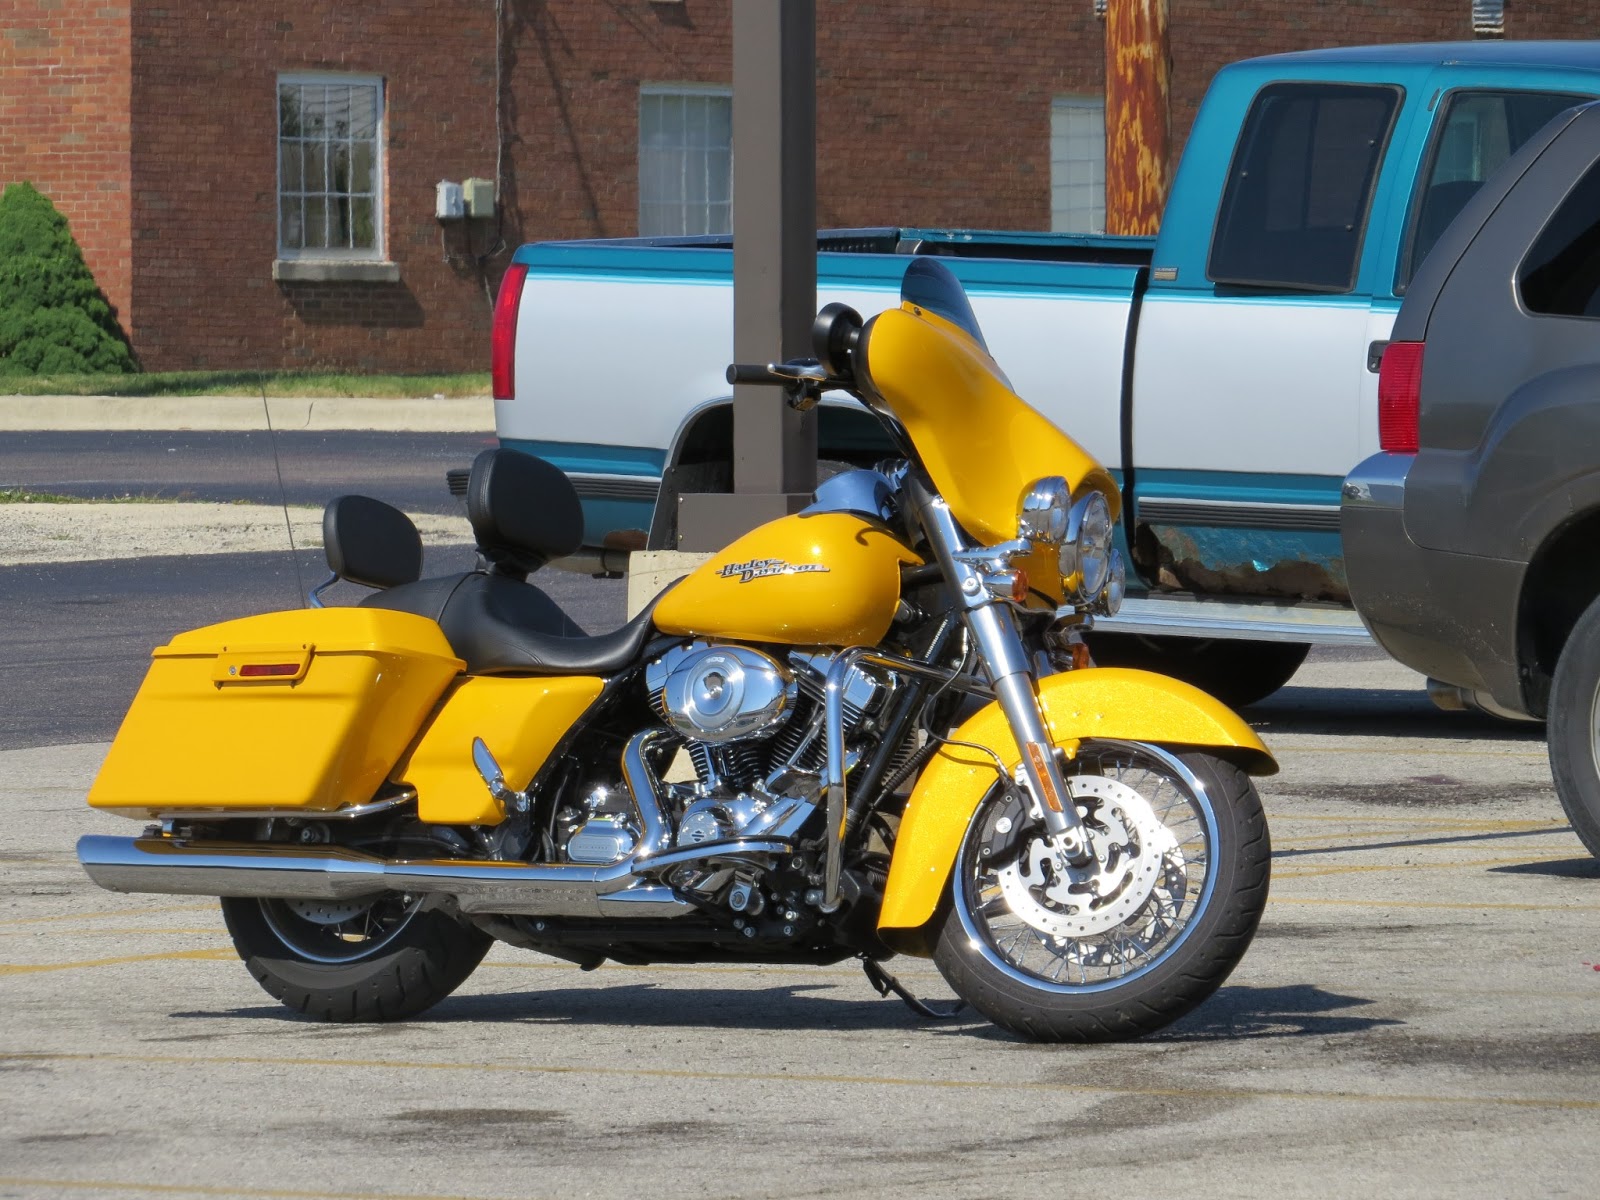 Lensing and Shuttering: Yellow Motorcycle